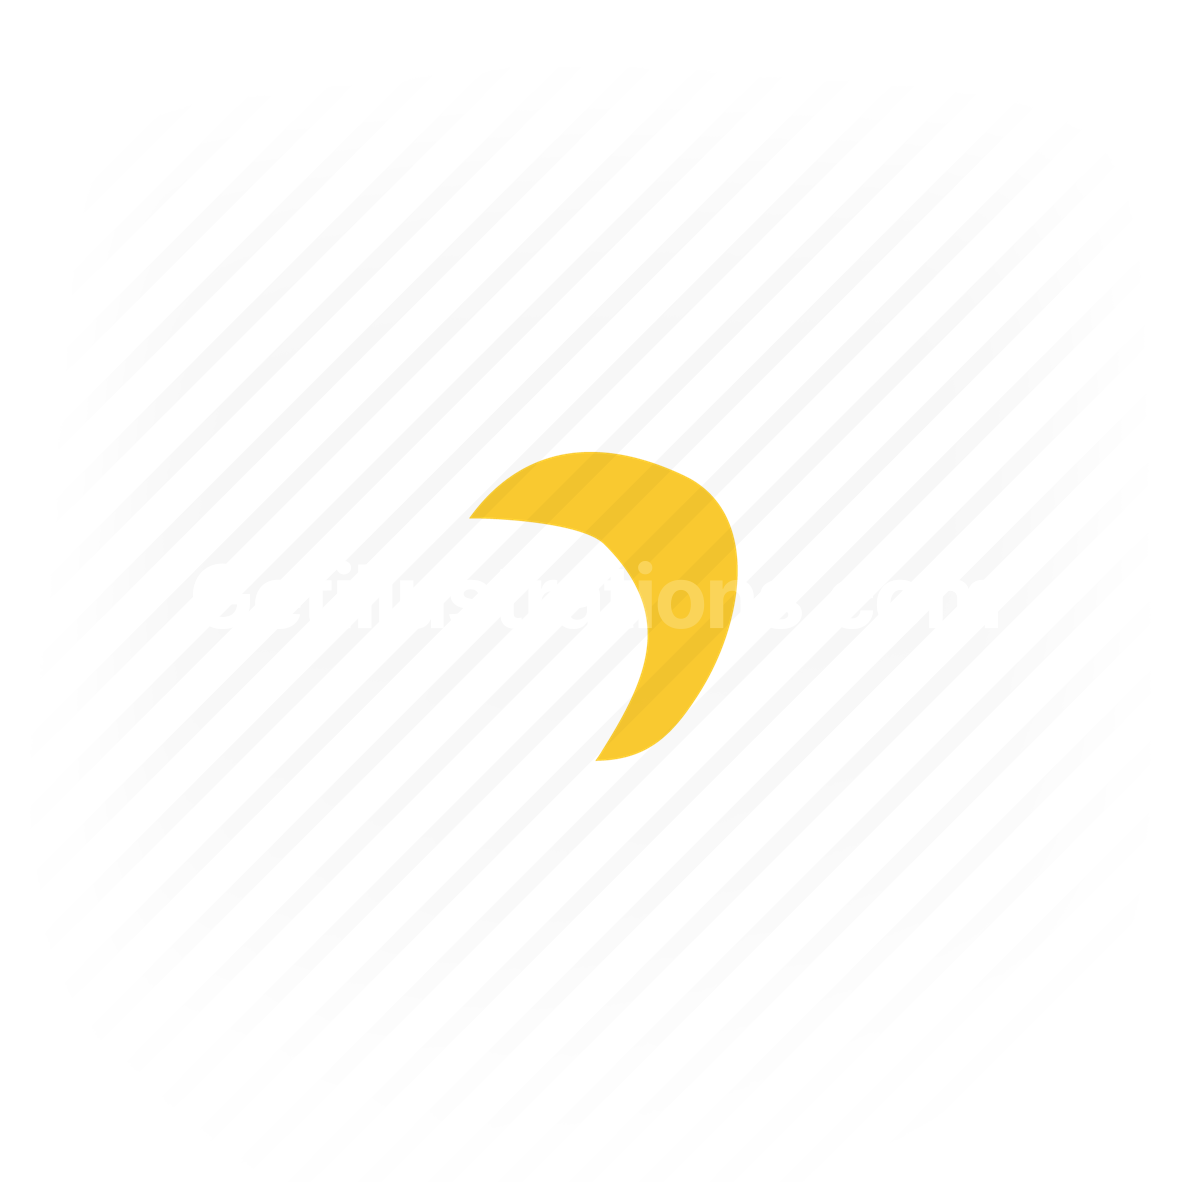 moon, night, day, cloud, weather, forecast